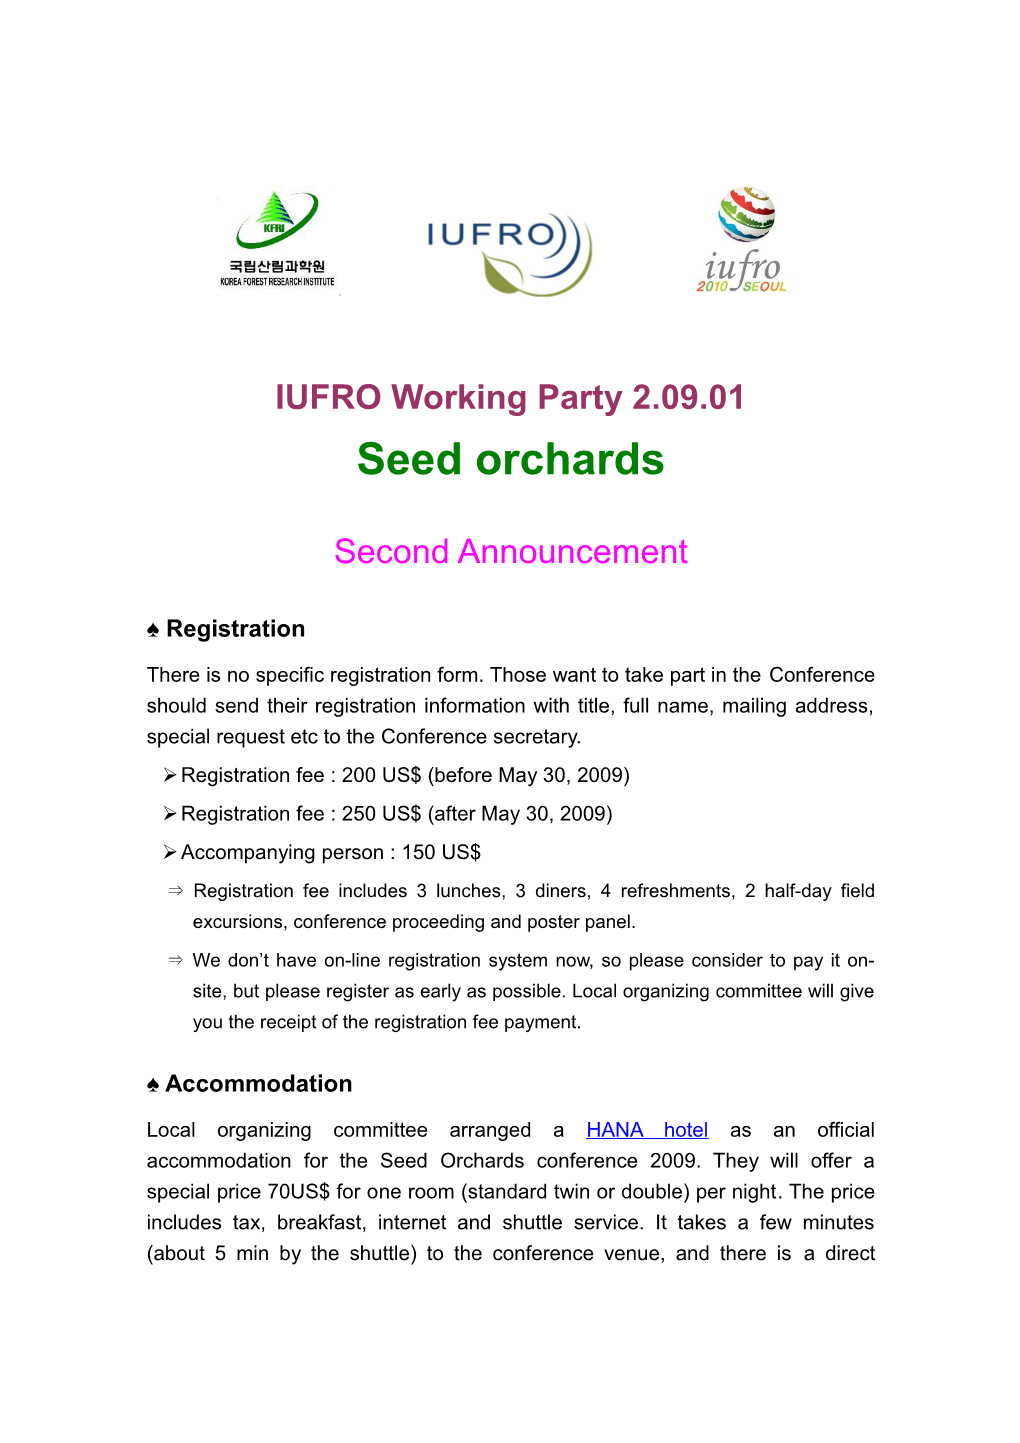 IUFRO Working Party 2